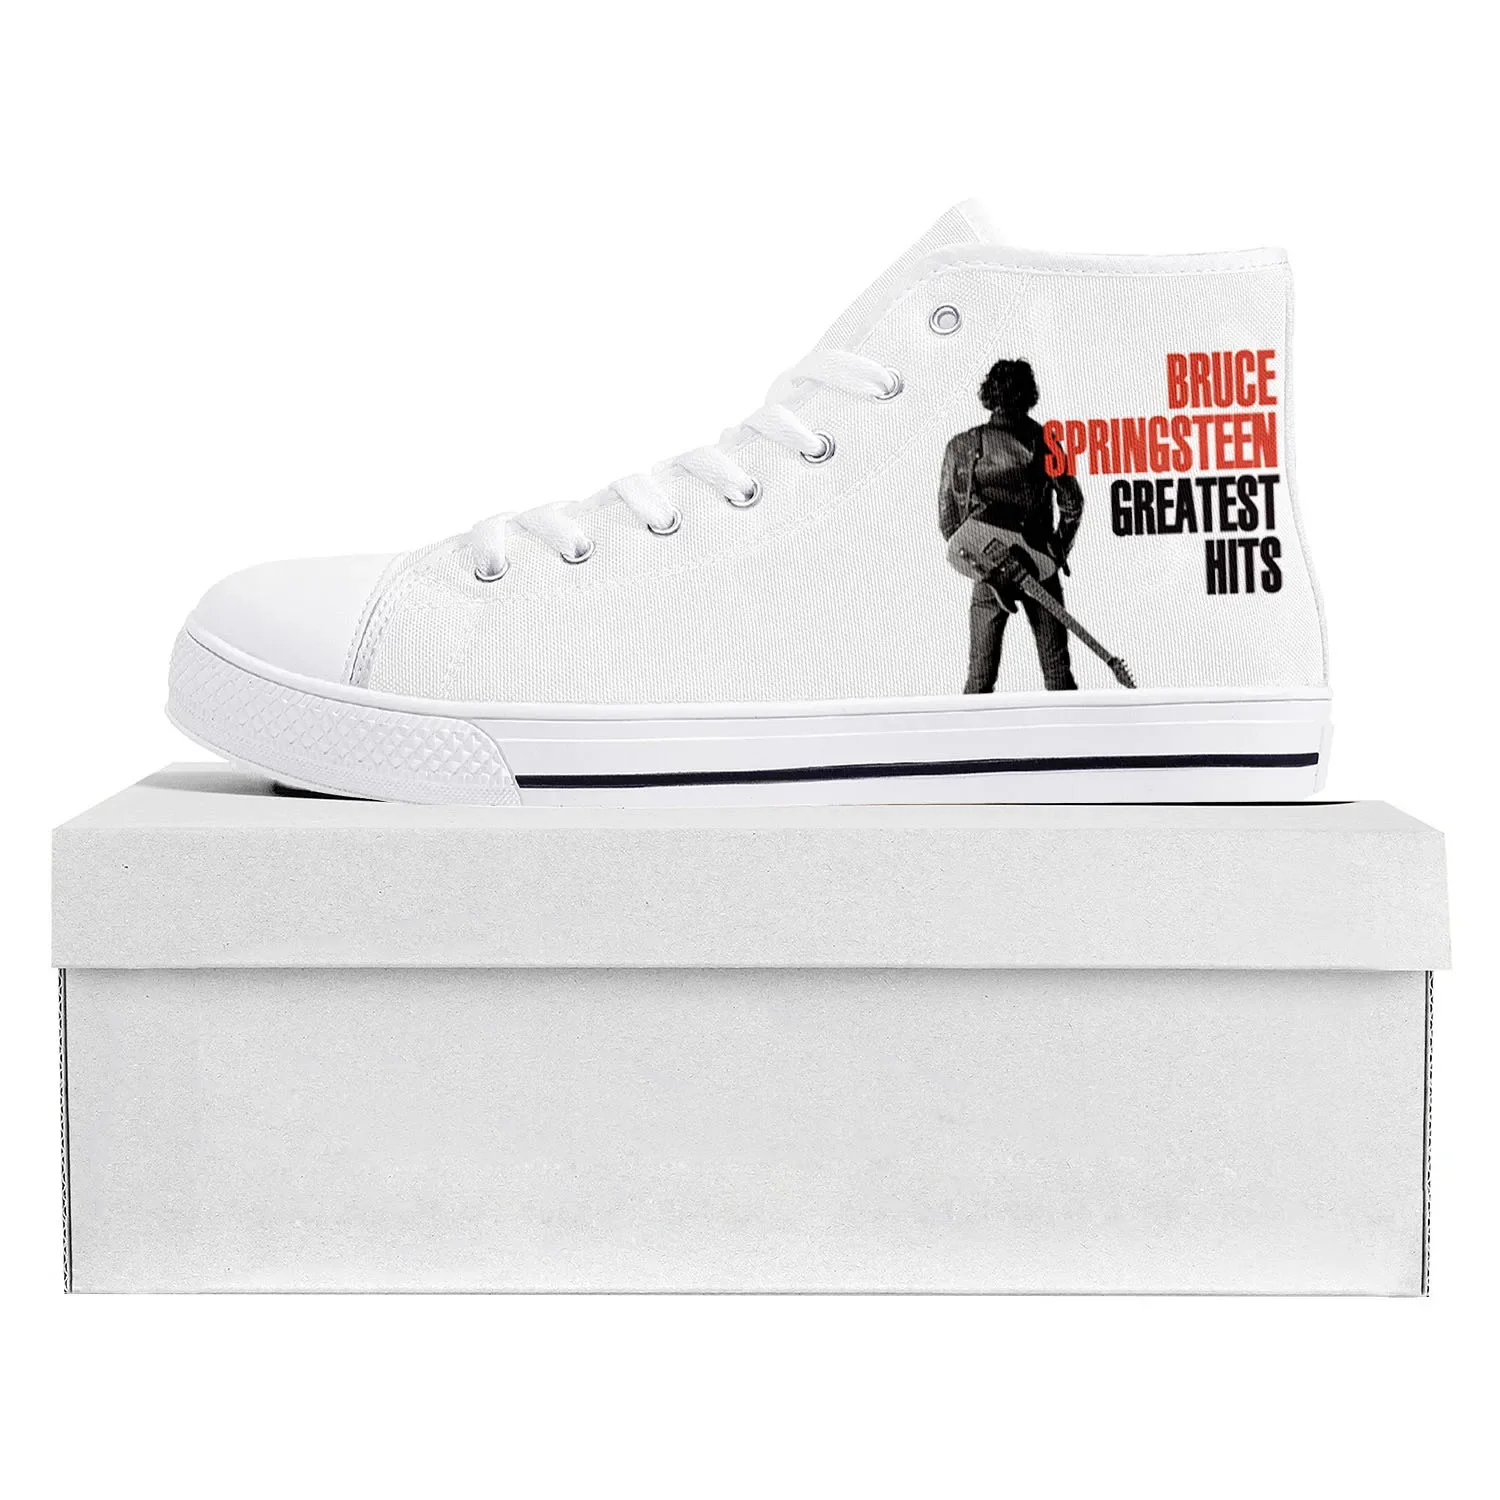 

Born To Run High Top High Quality Bruce Springsteen Sneakers Mens Womens Teenager Canvas Sneaker Casual Couple Shoes Custom Shoe